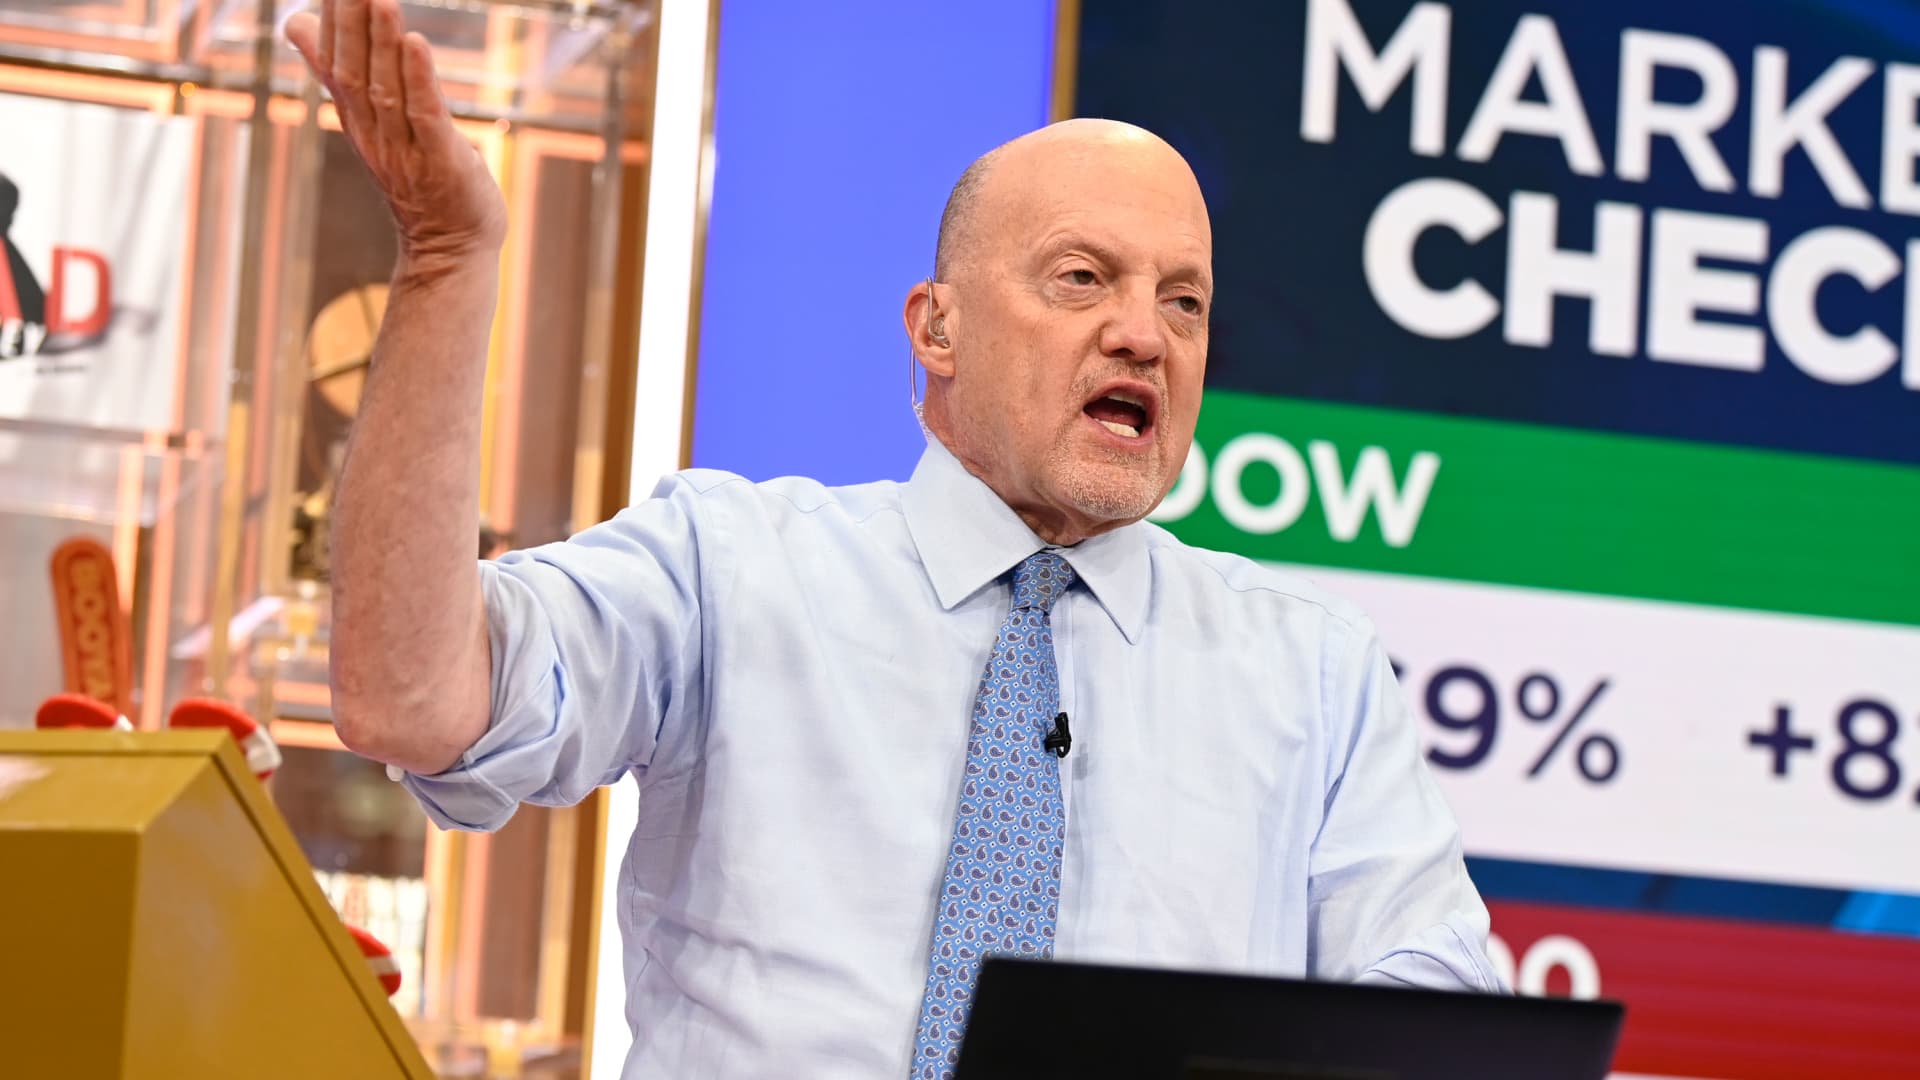 A frozen IPO market signals two optimistic factors for stocks, CNBC’s Jim Cramer suggests